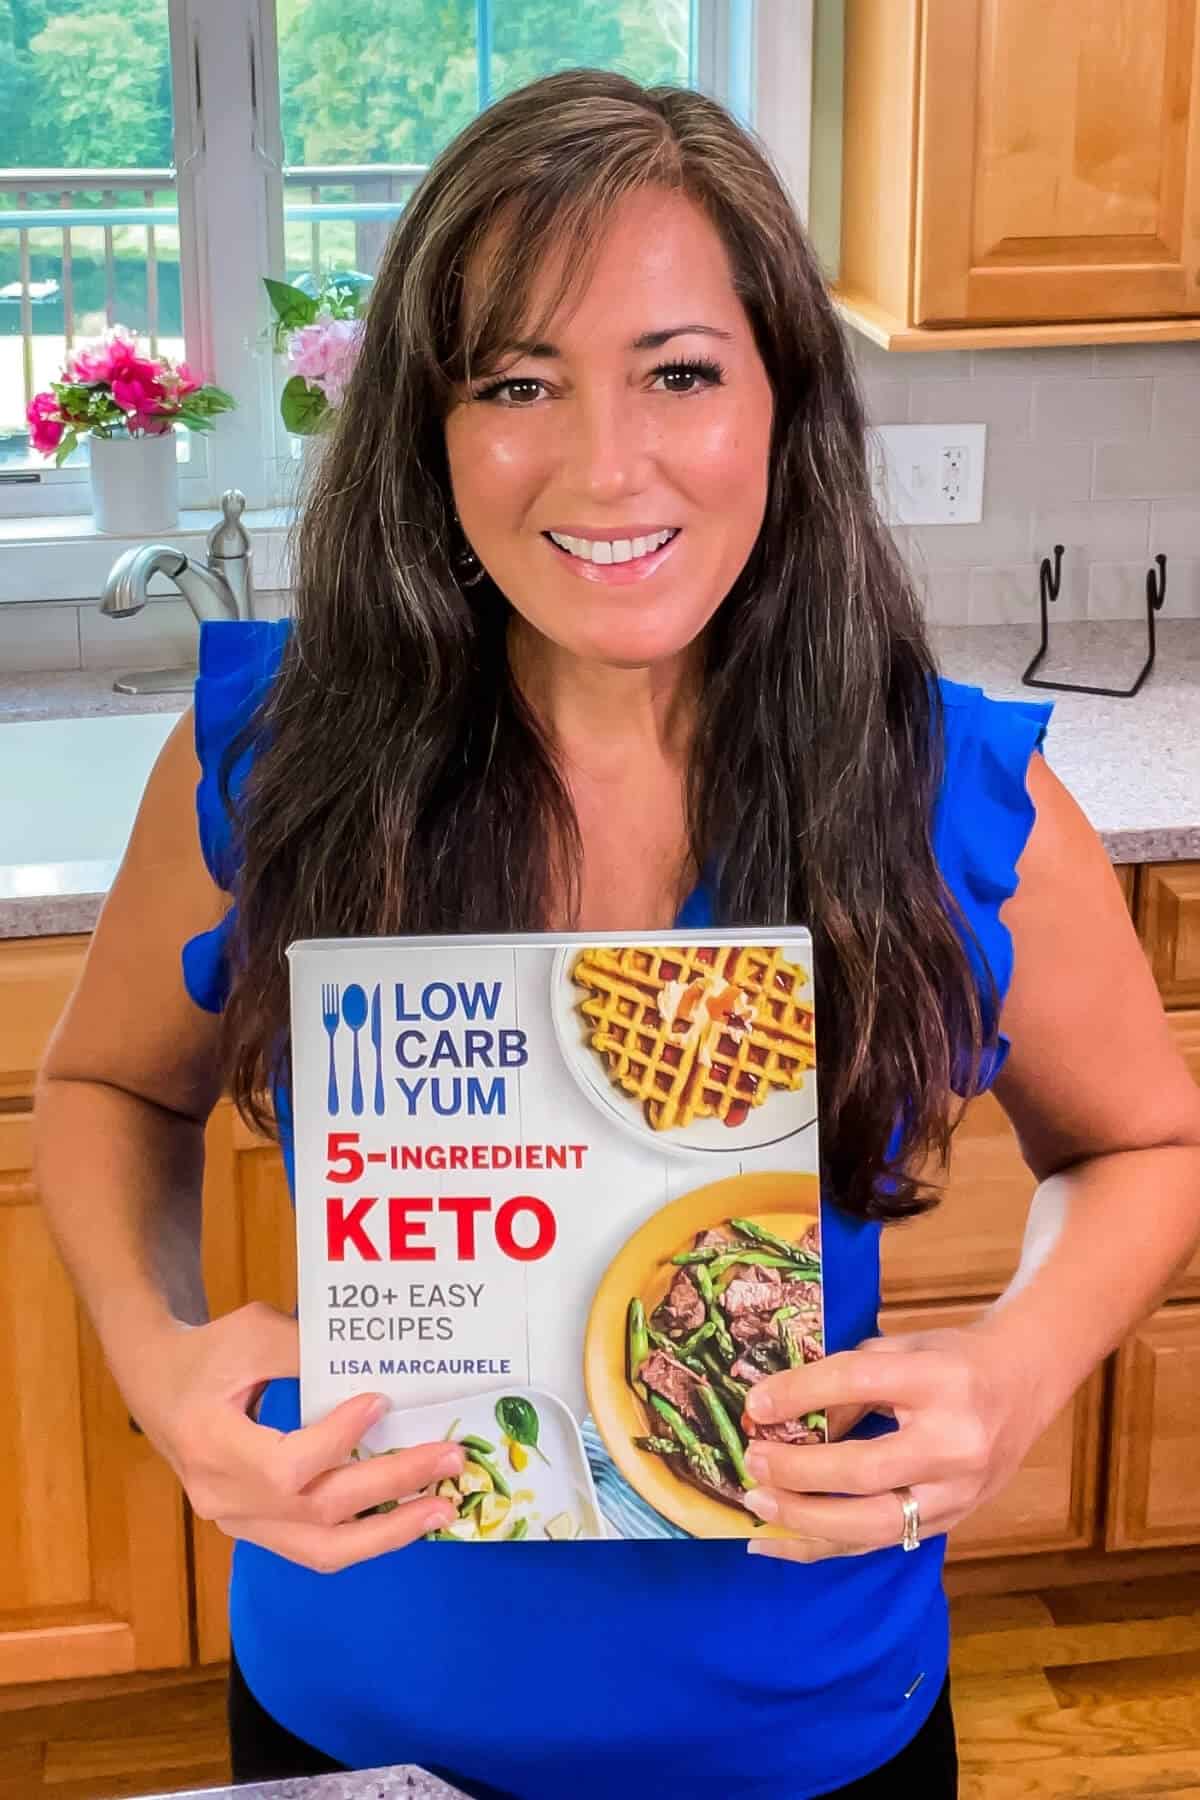 lisa in kitchen with low carb yum 5-ingredient keto cookbook